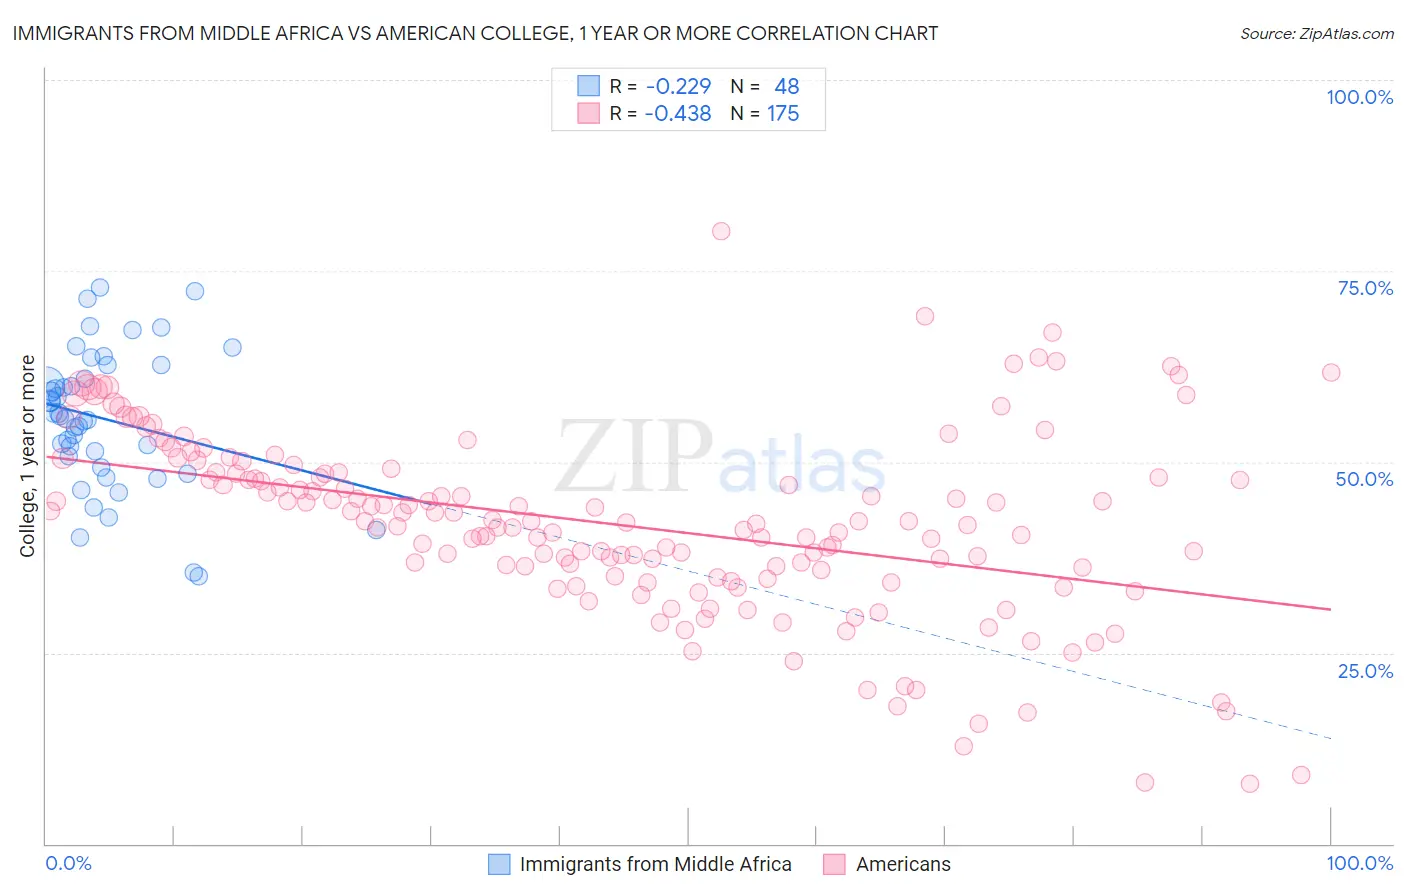 Immigrants from Middle Africa vs American College, 1 year or more